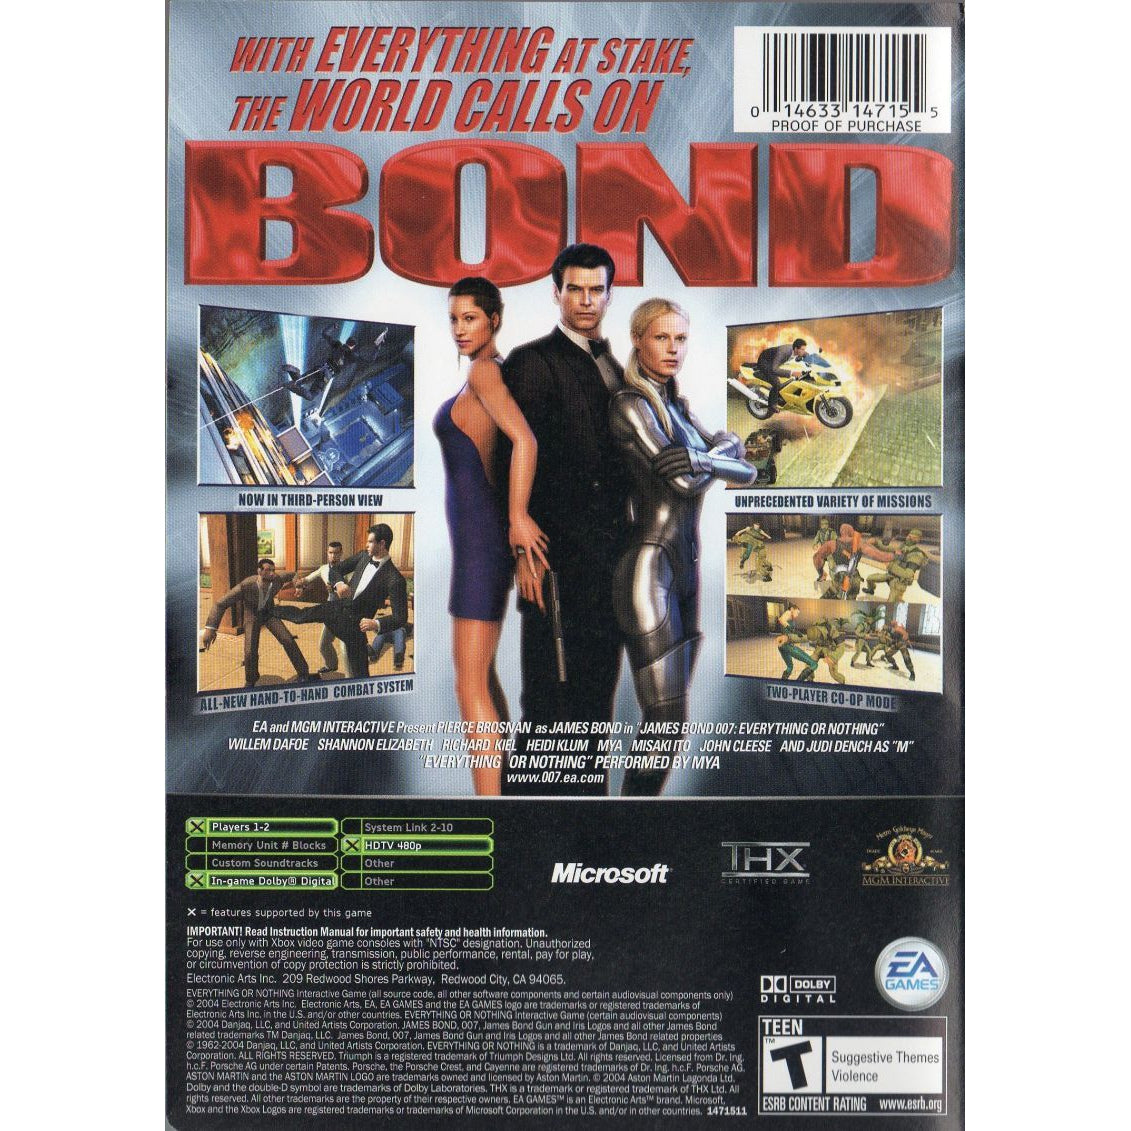 007: Everything or Nothing - Microsoft Xbox Game Complete - YourGamingShop.com - Buy, Sell, Trade Video Games Online. 120 Day Warranty. Satisfaction Guaranteed.